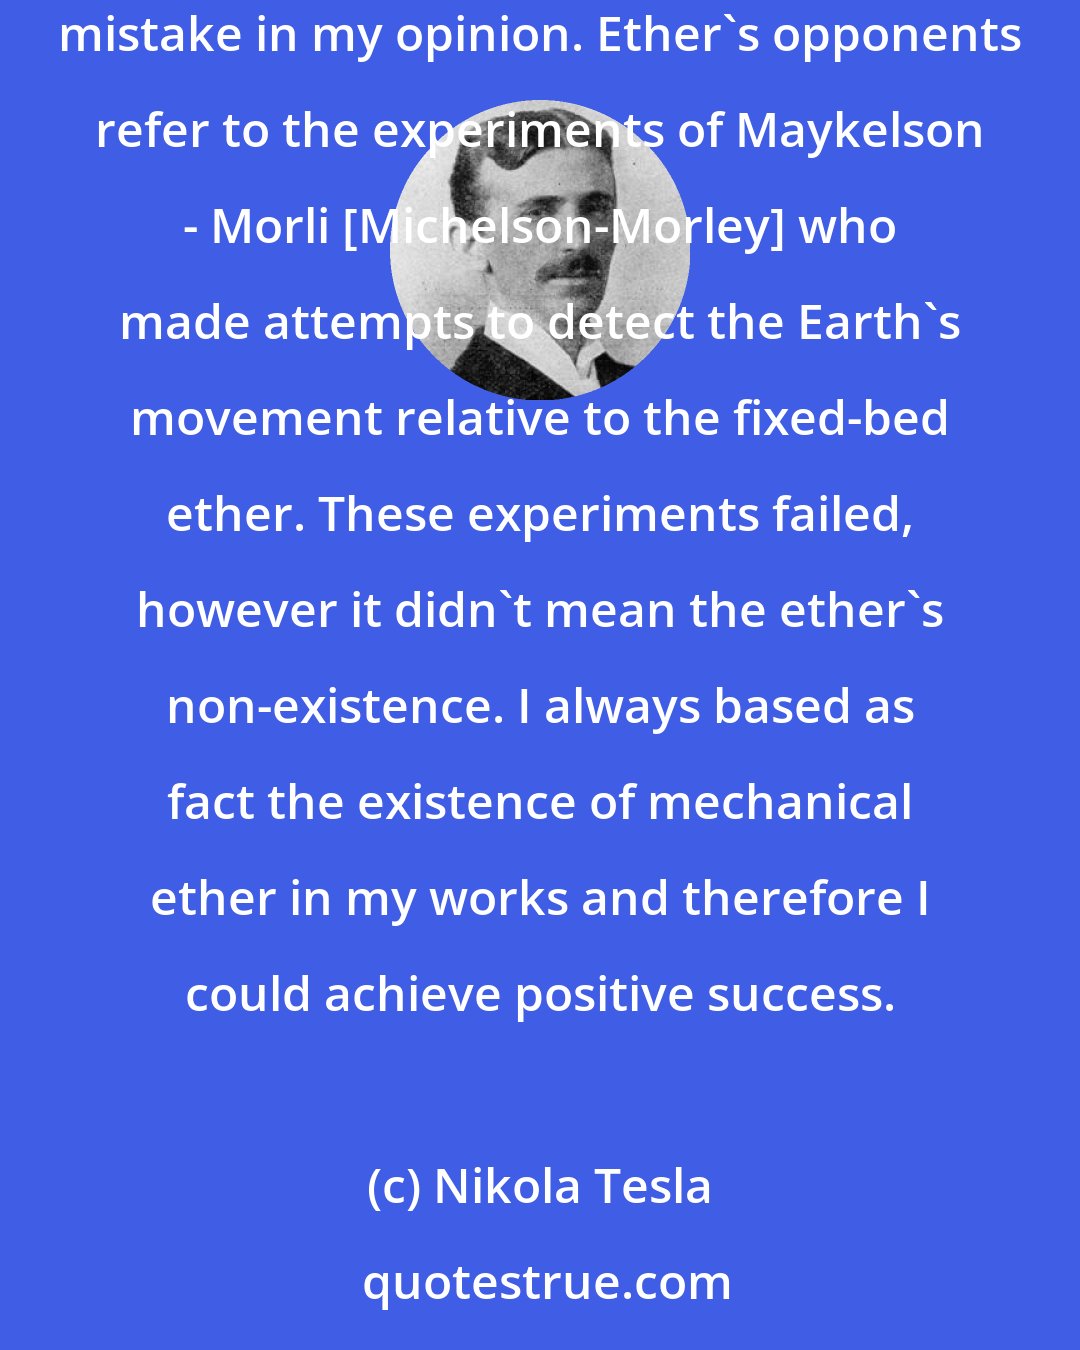 Nikola Tesla: They say much about the Einstein's theory now. According to Einstein the ether does not exist and many people agree with him. But it is a mistake in my opinion. Ether's opponents refer to the experiments of Maykelson - Morli [Michelson-Morley] who made attempts to detect the Earth's movement relative to the fixed-bed ether. These experiments failed, however it didn't mean the ether's non-existence. I always based as fact the existence of mechanical ether in my works and therefore I could achieve positive success.